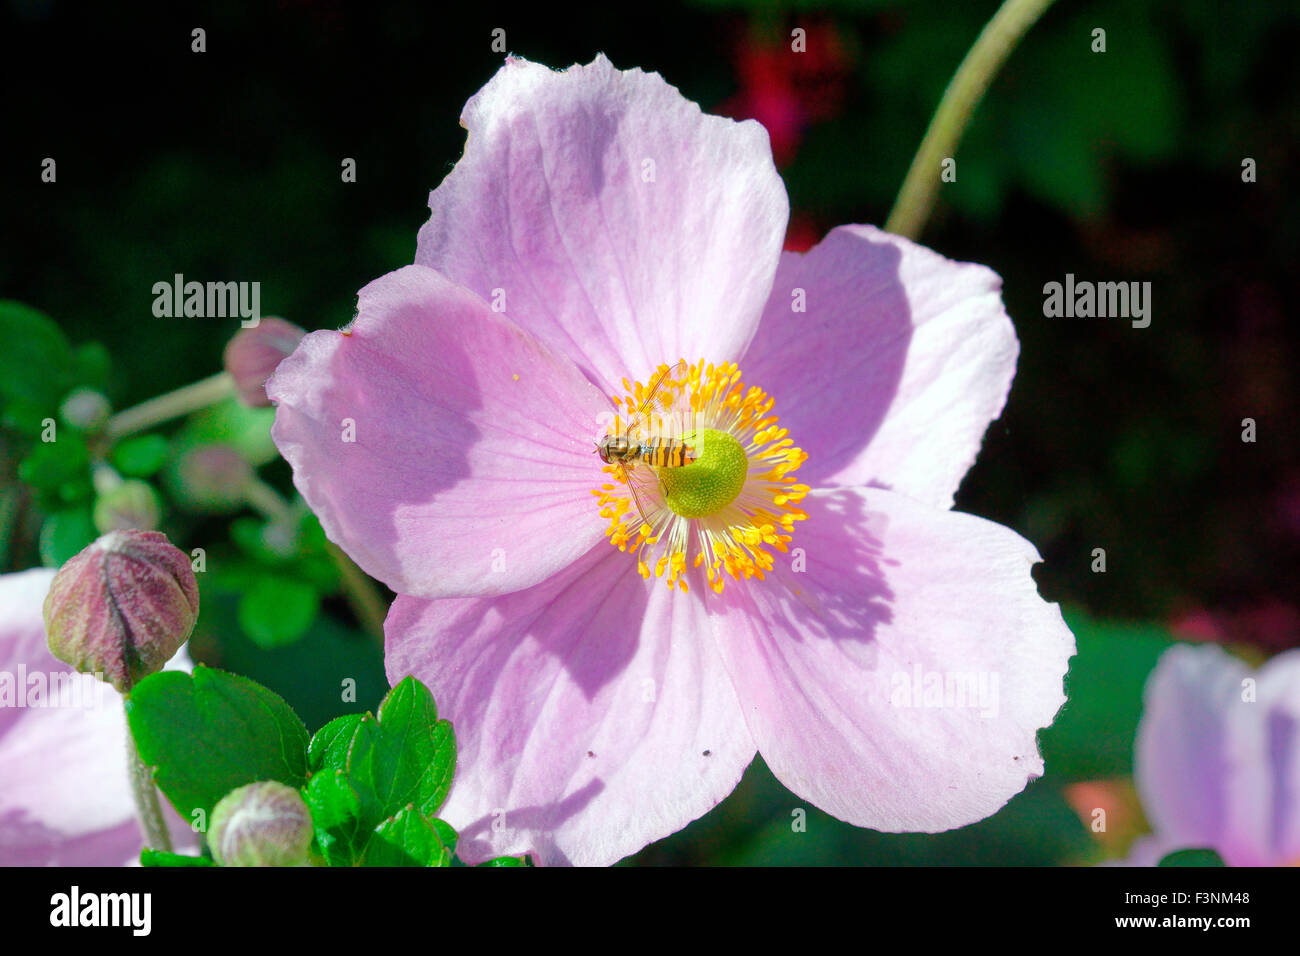 HOVERFLY ON SEPTEMBER CHARM (JAPANESE, ANEMONES) Stock Photo